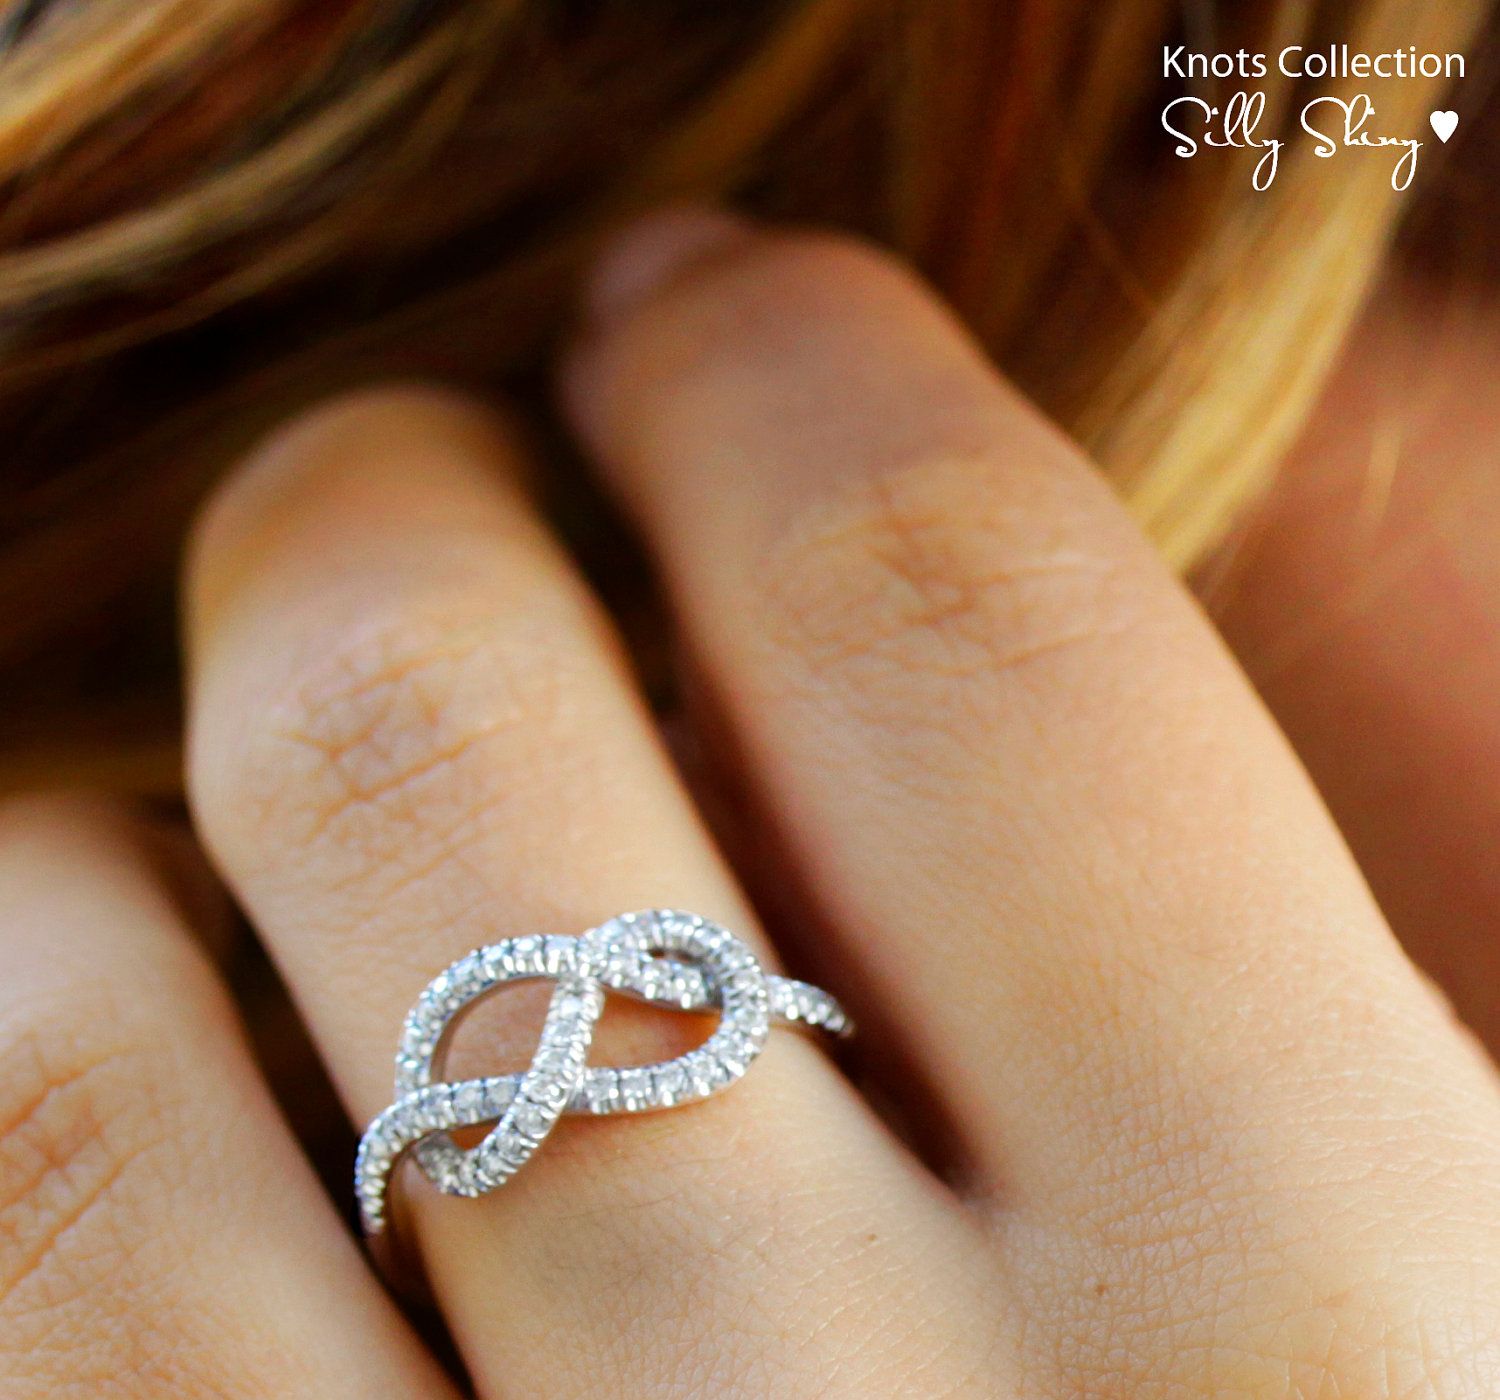 Infinity knot ring. i love this!